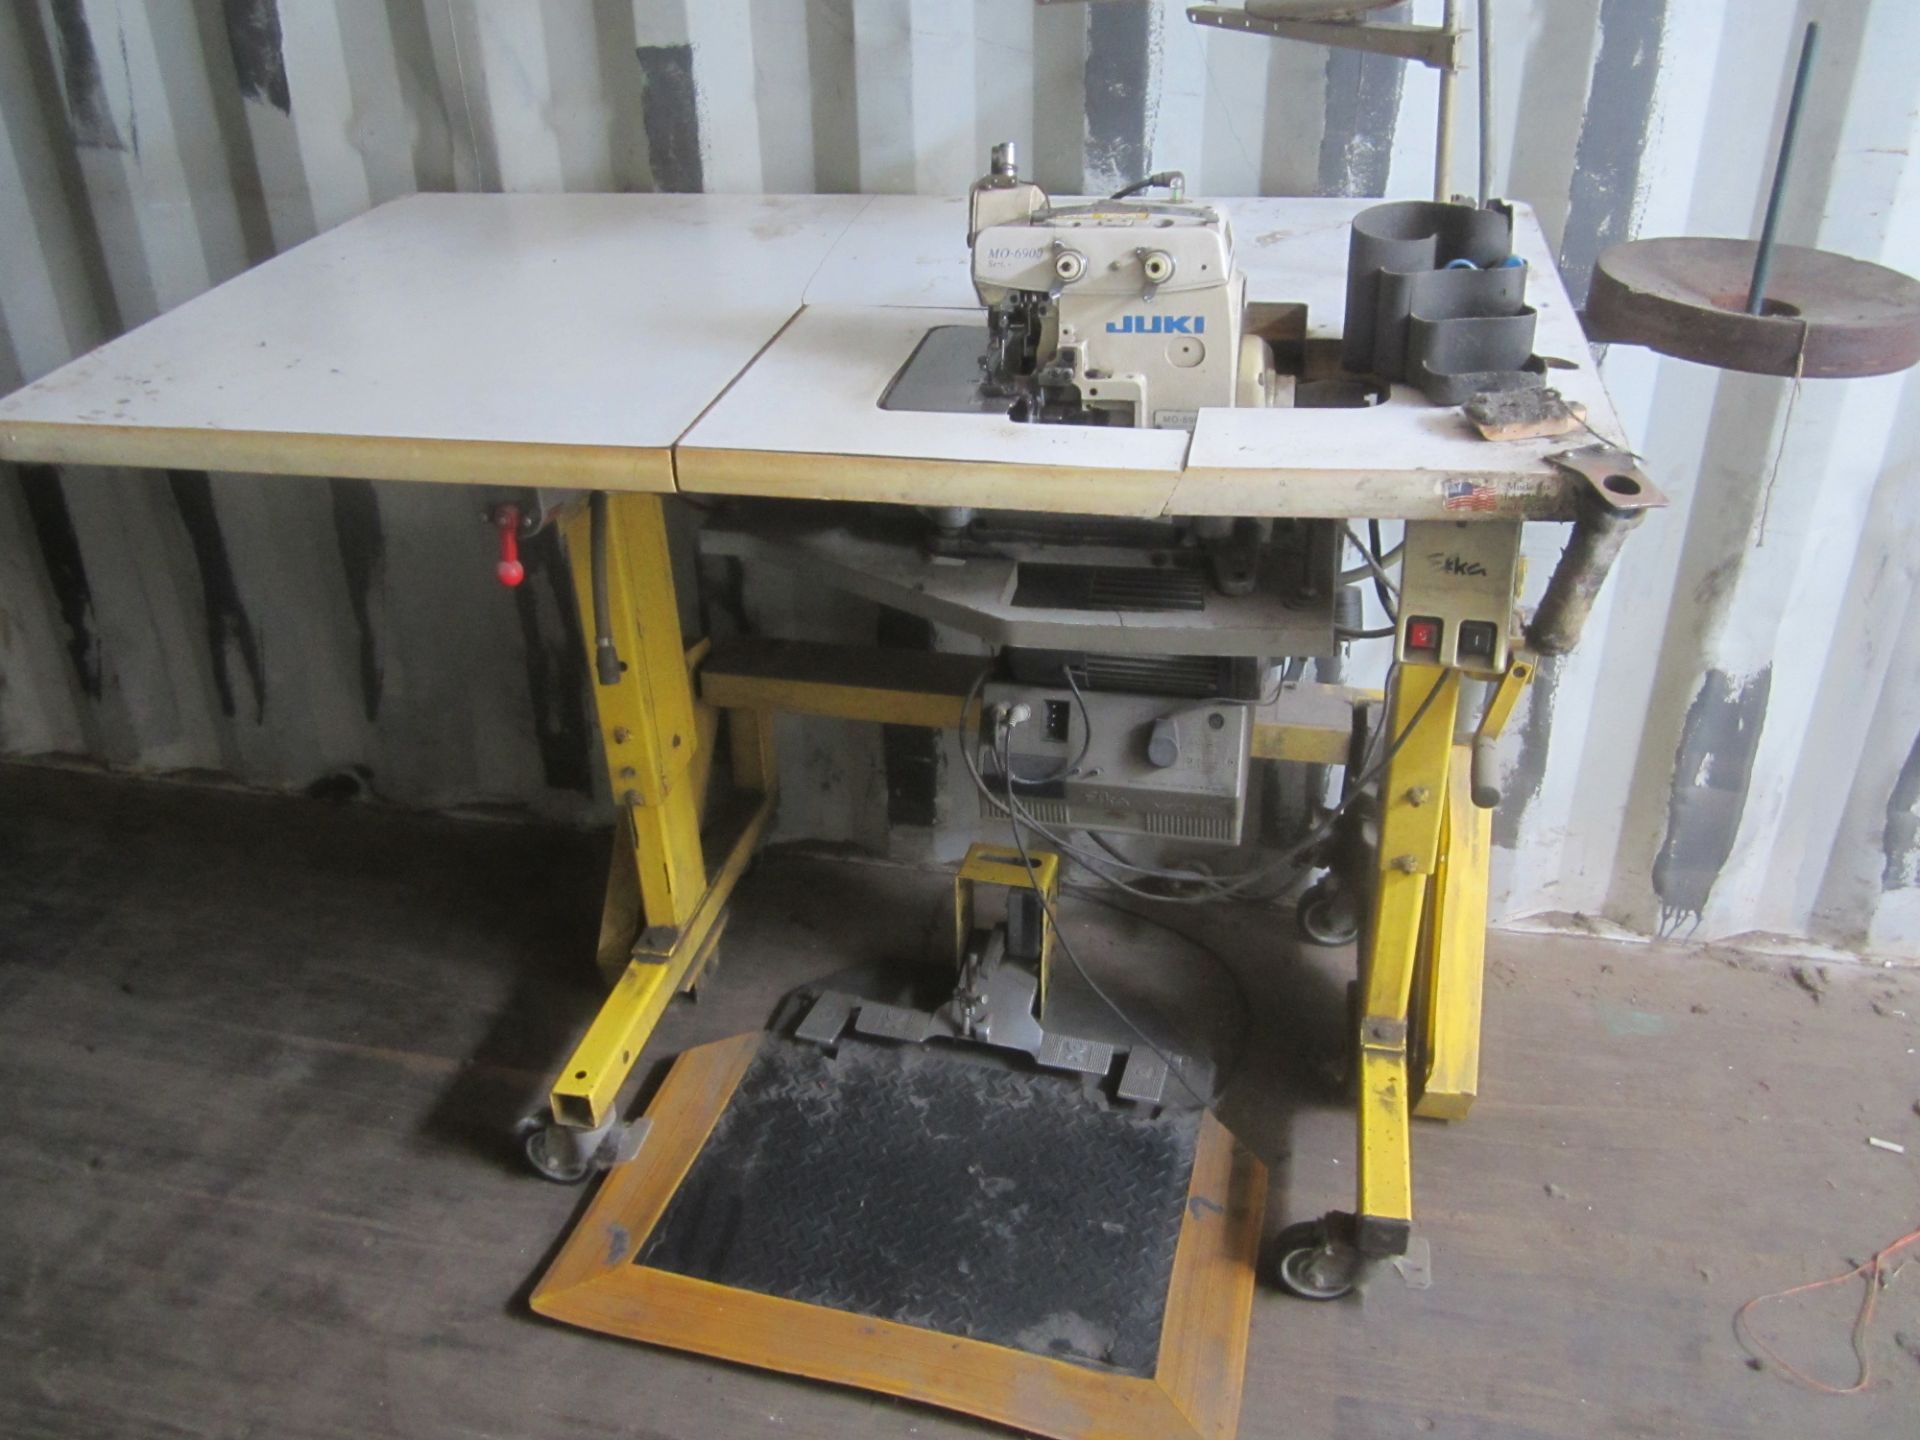 Juki Model MO-6905G Class OM6-700 Industrial Sewing Machine, s/n 8MOEJ31236, with Table and Foot